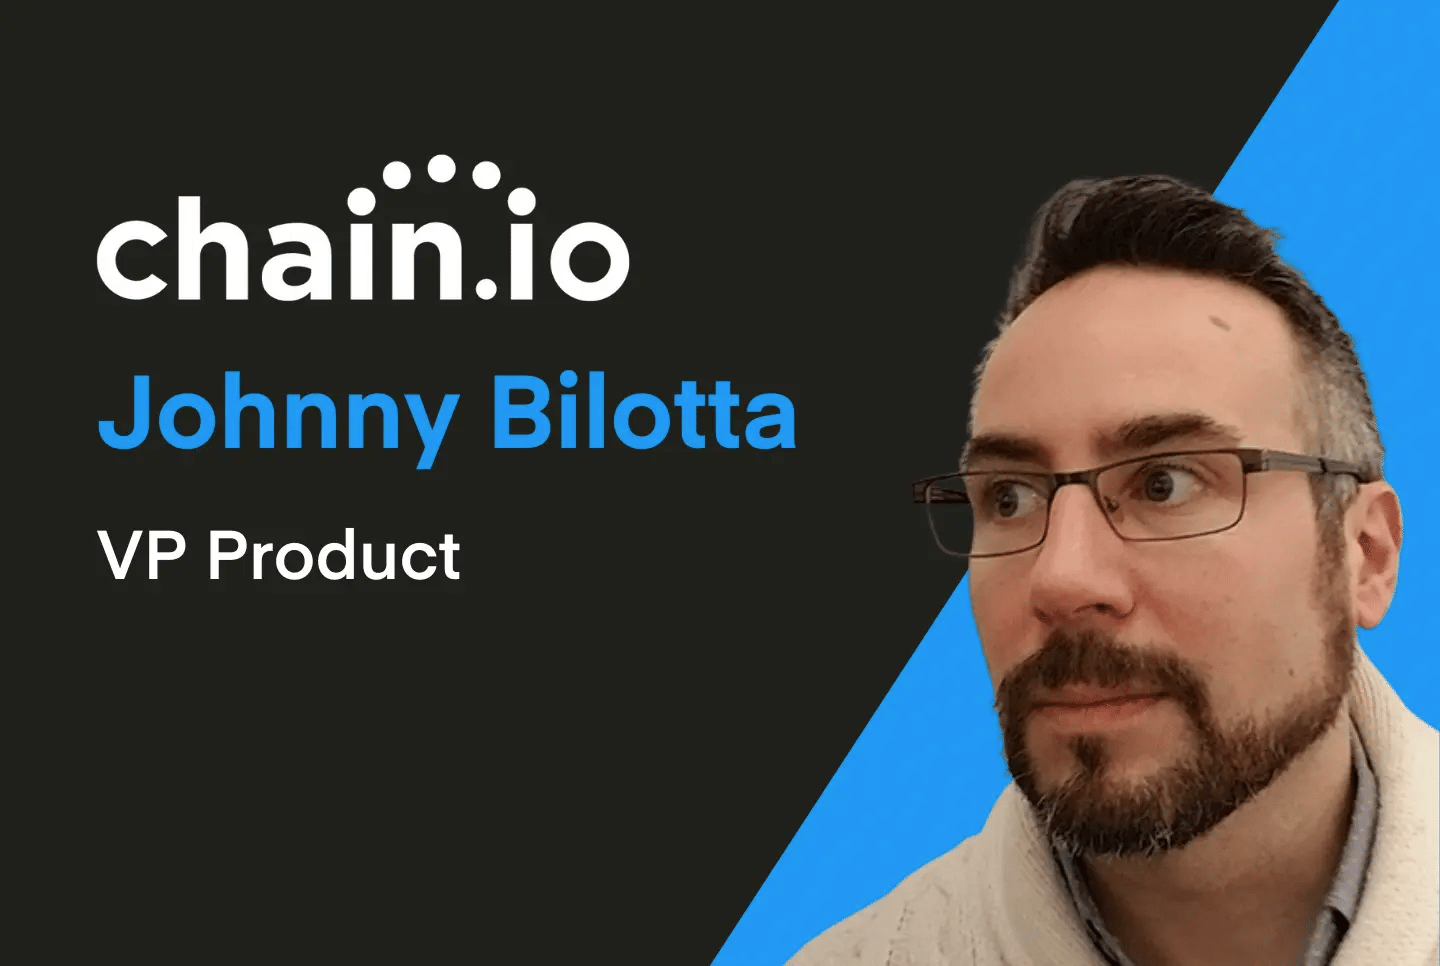 Johnny Bilotta named VP of Product at Chain.io